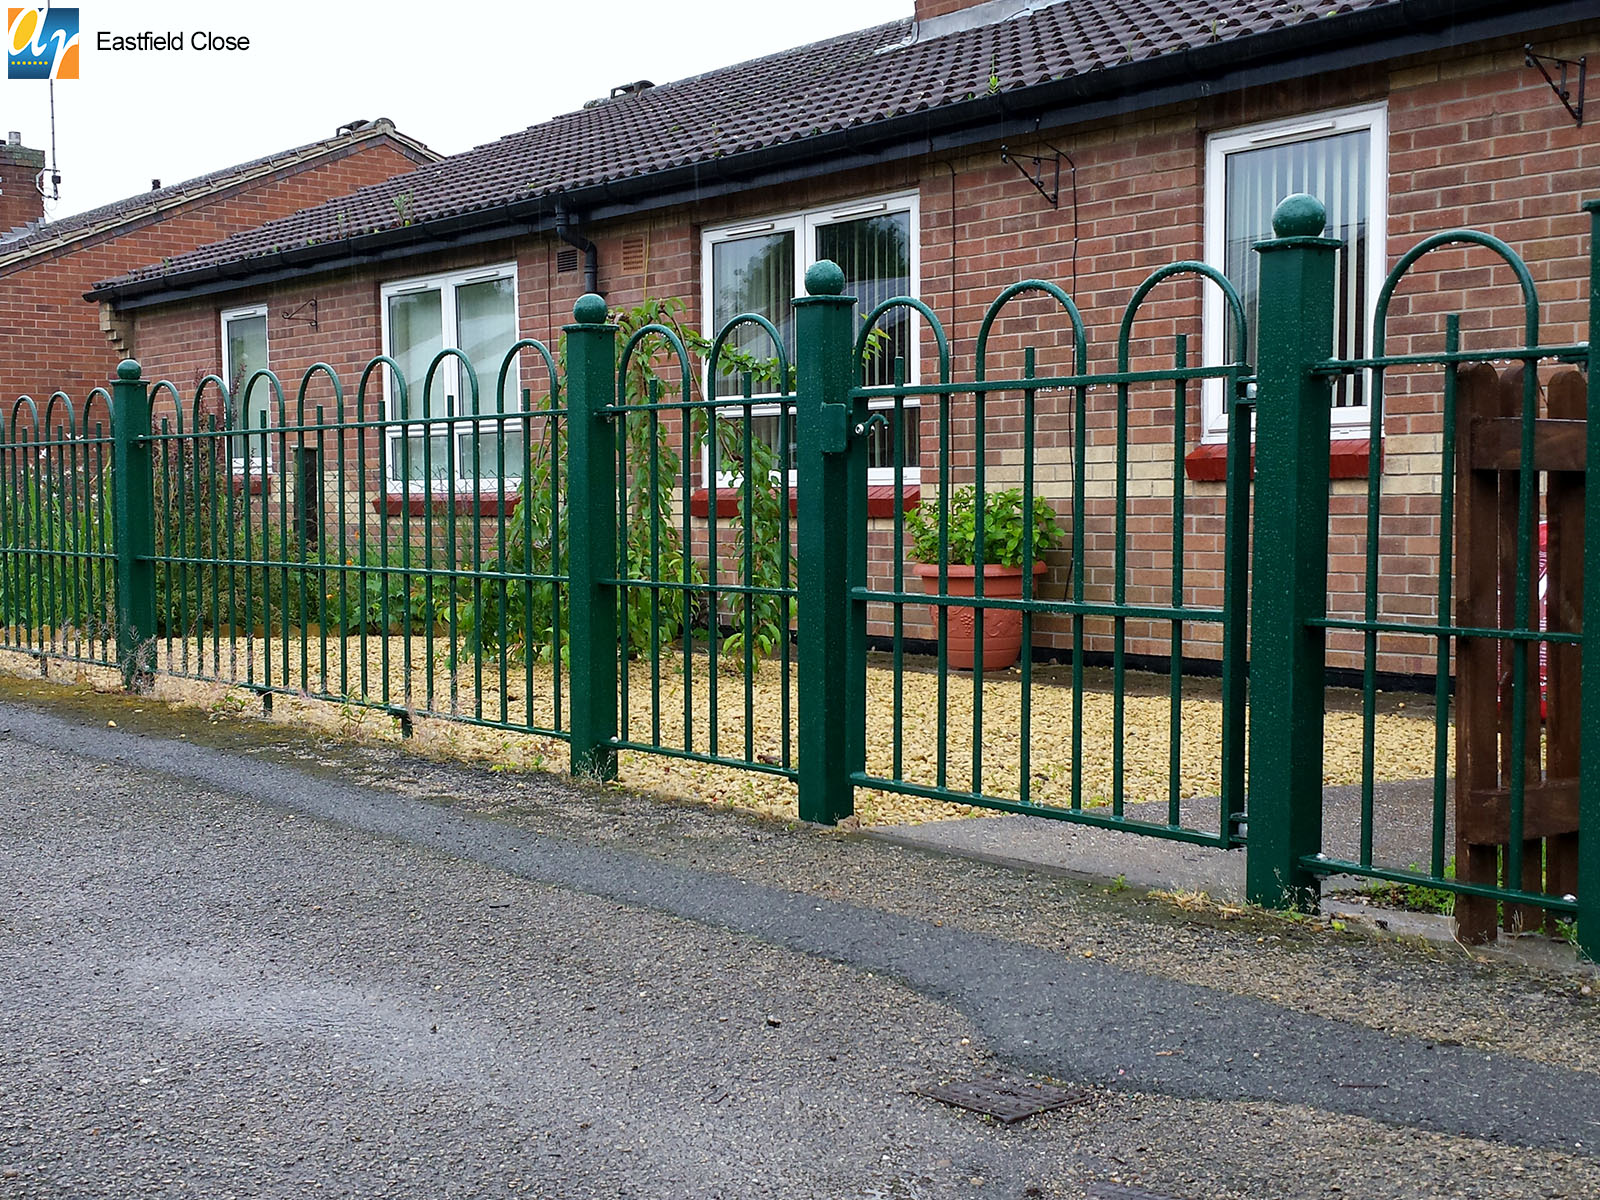 Eastfield Close metal railings and gates